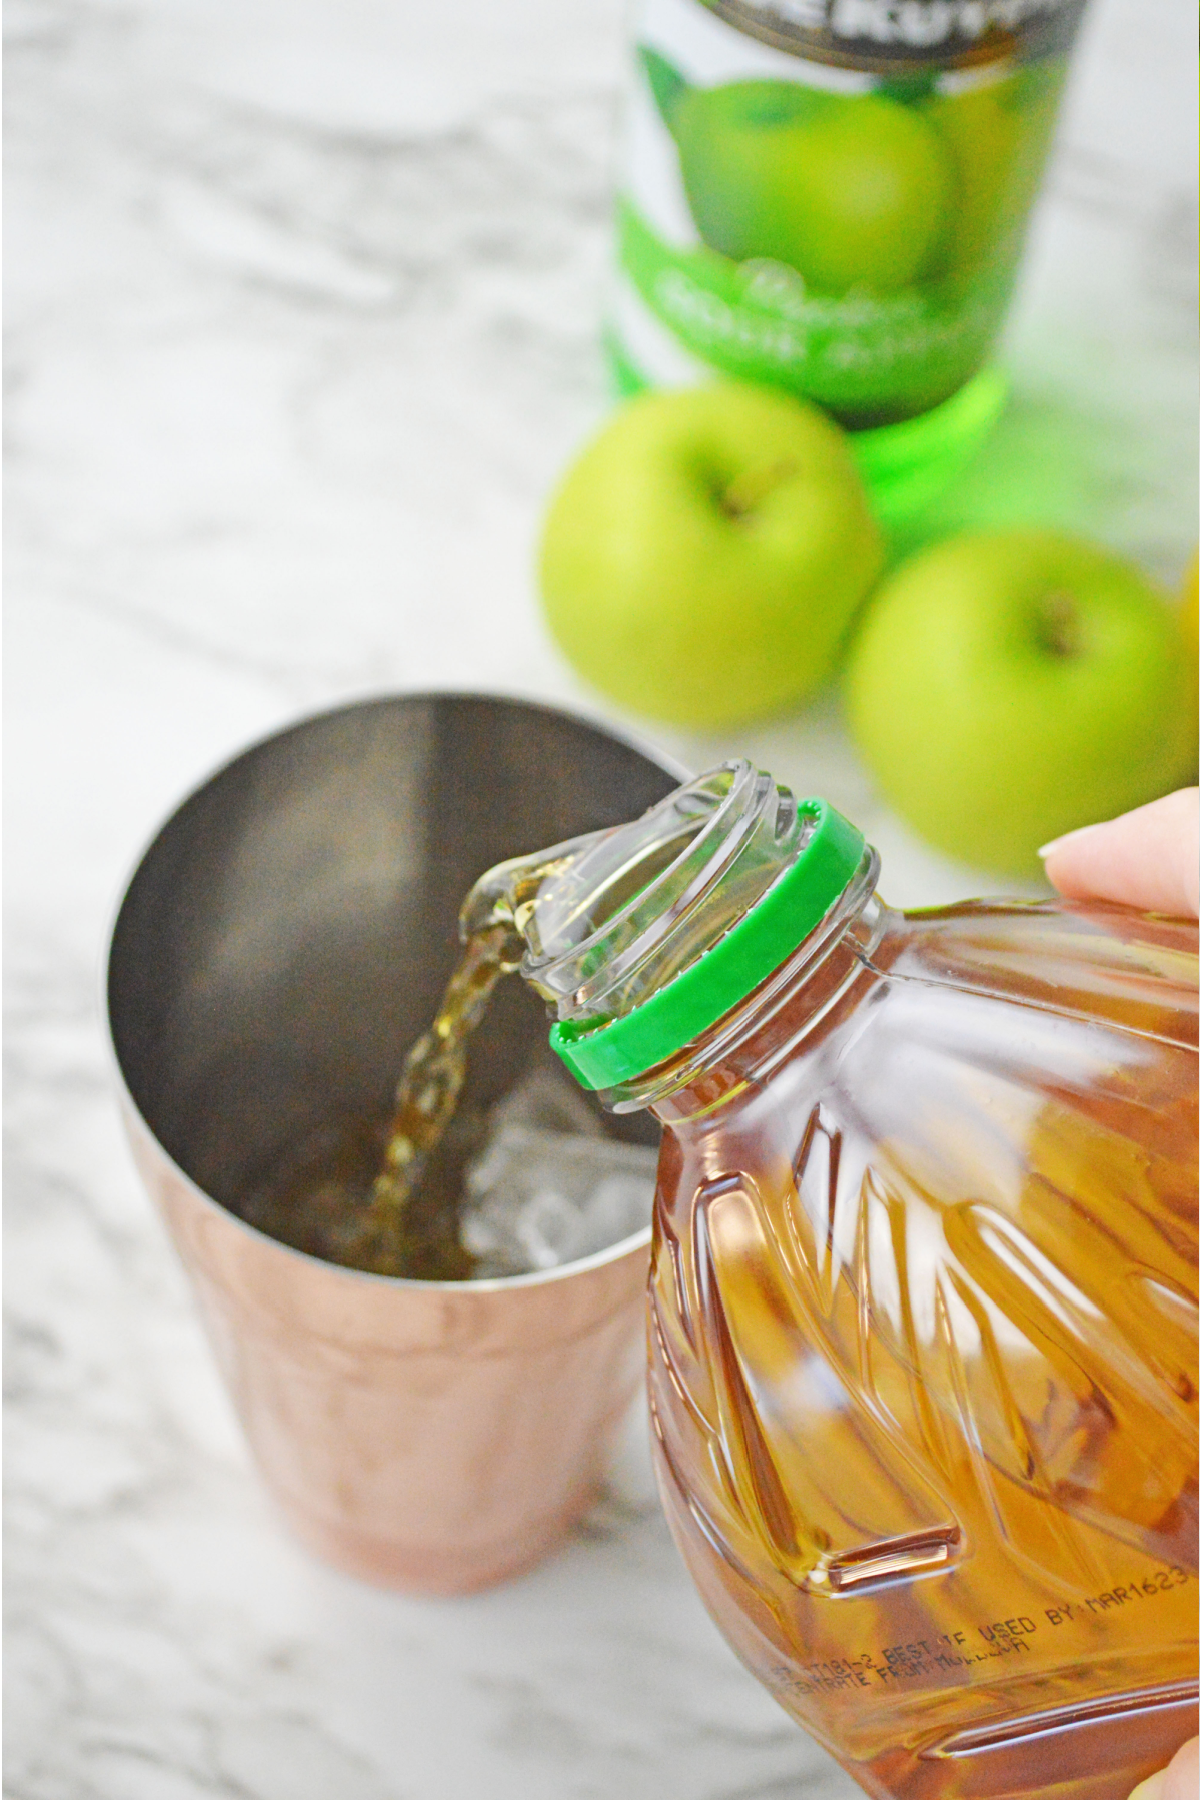 Pouring apple juice into shaker